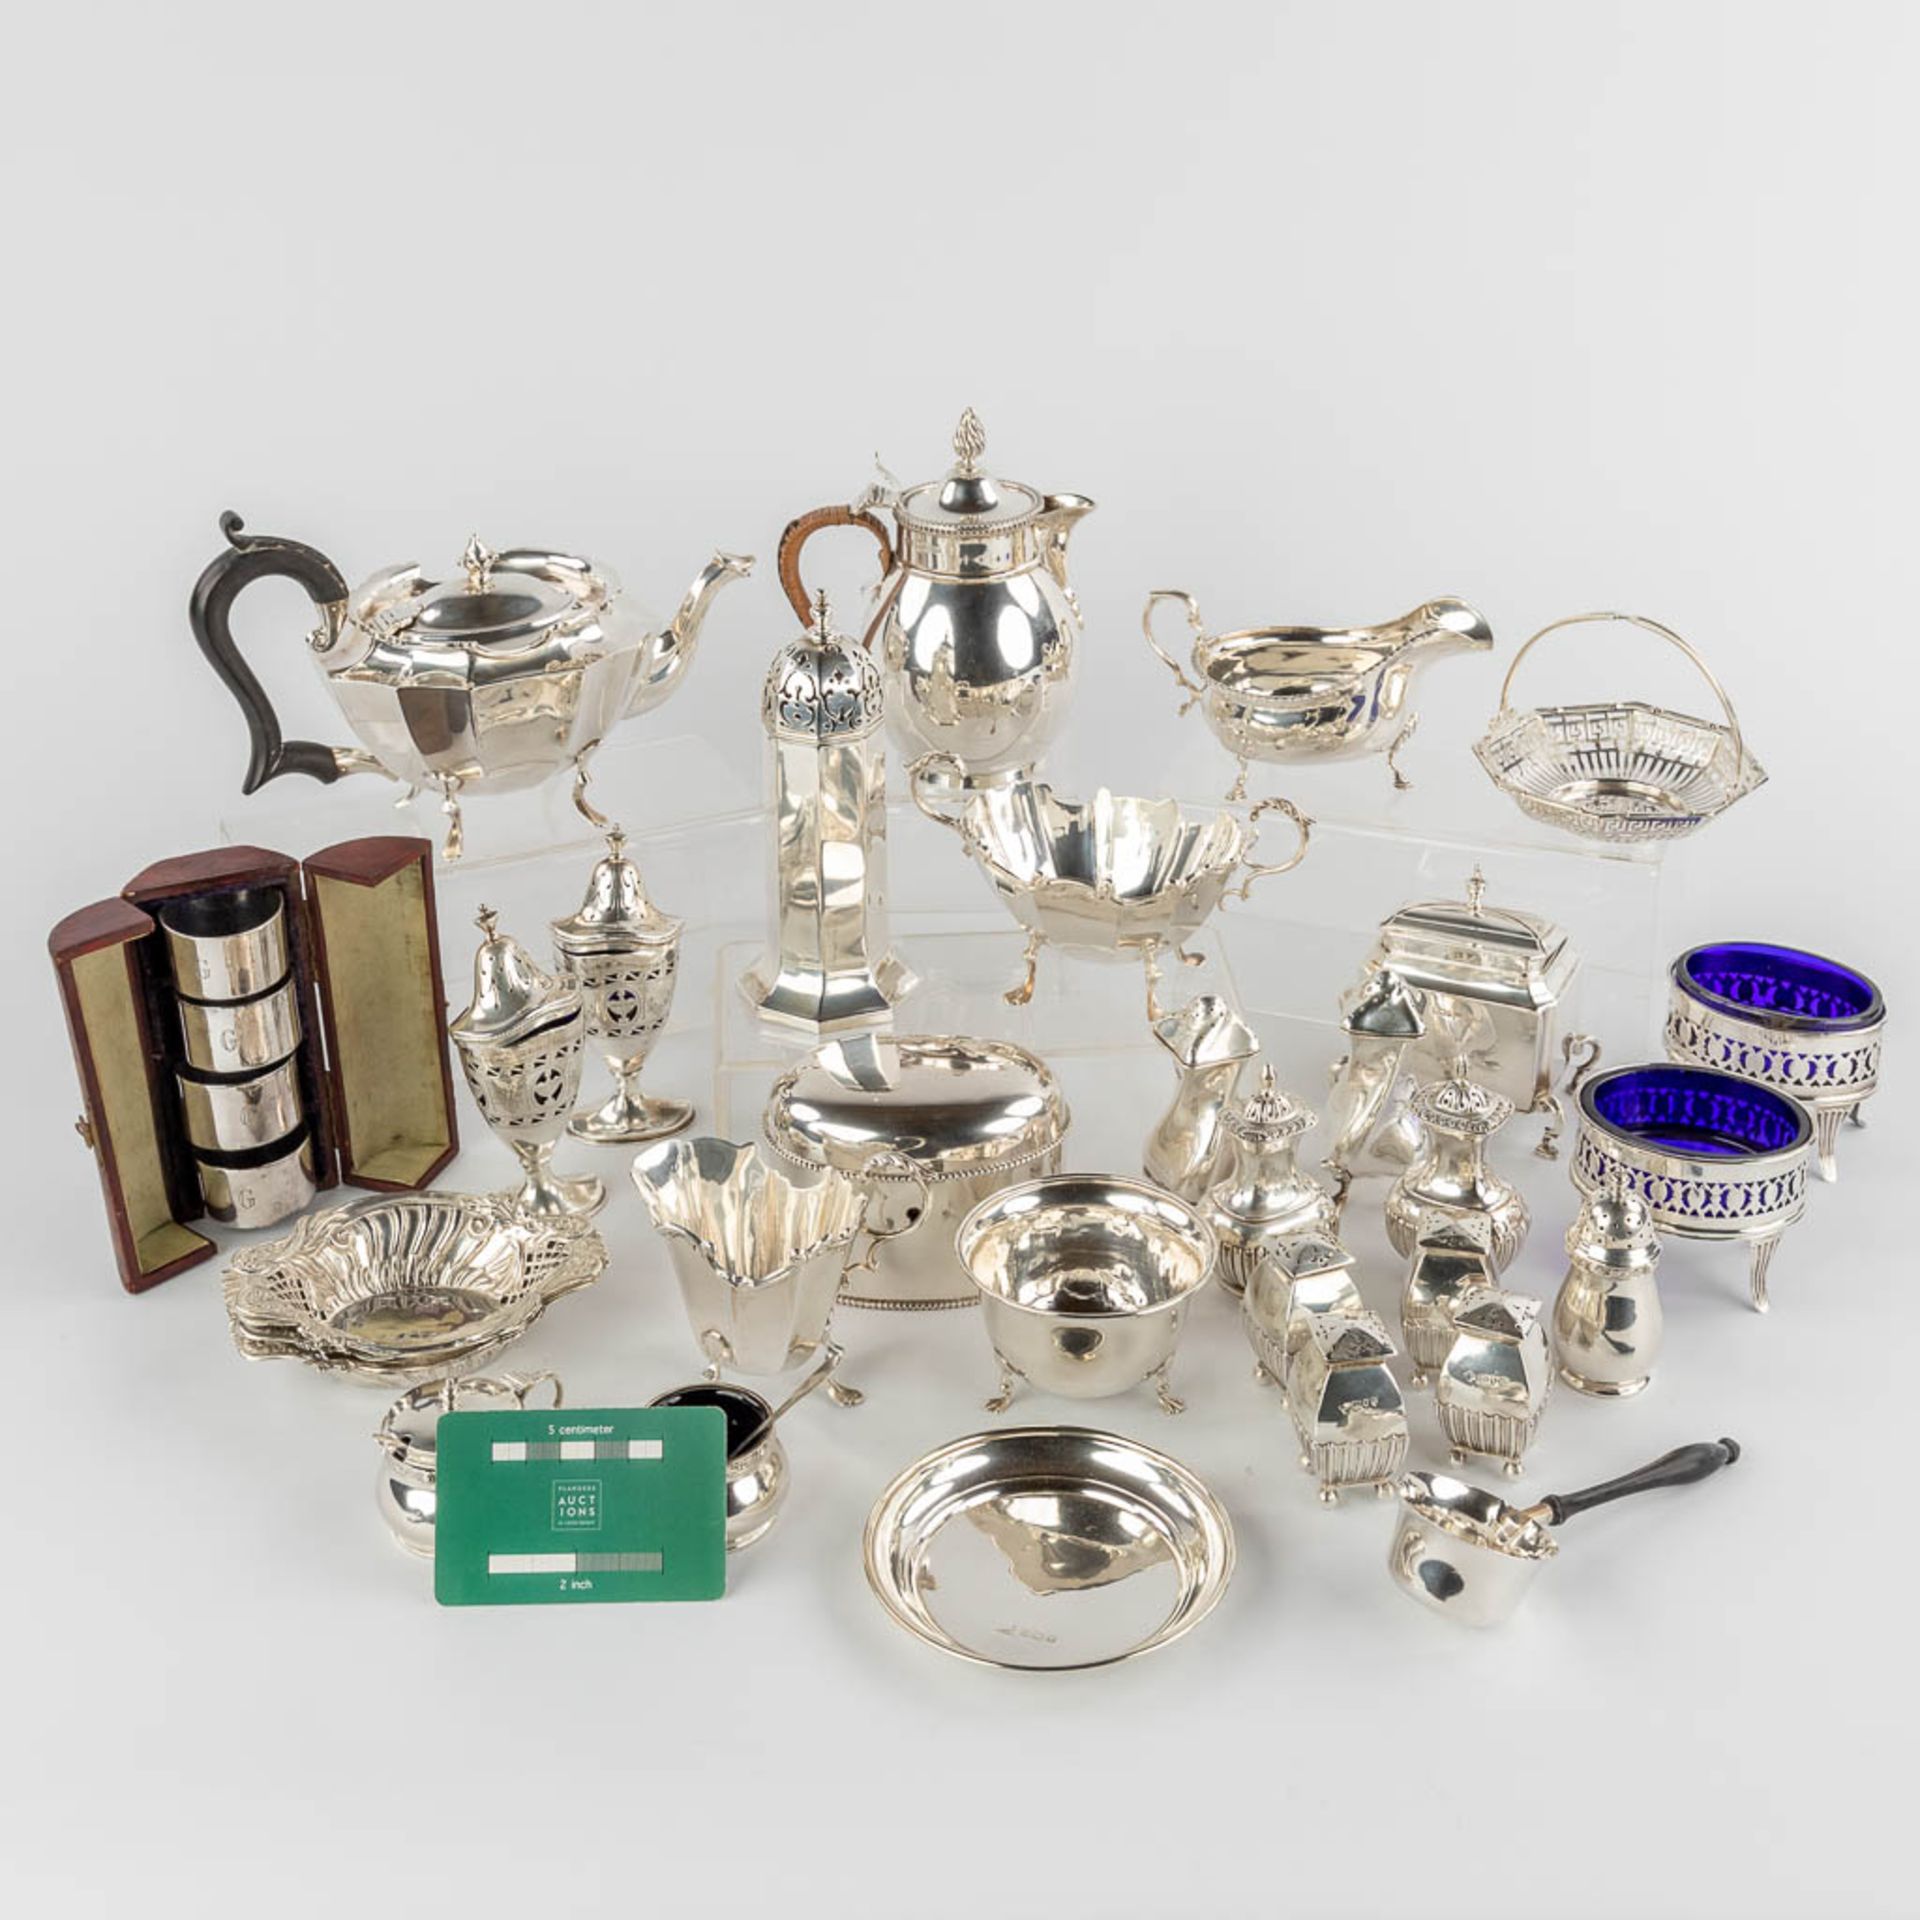 Large collection of silver items, Mostly England. 19th C. Total gross weight: 2915g. (W:22 x H:14 cm - Bild 2 aus 30